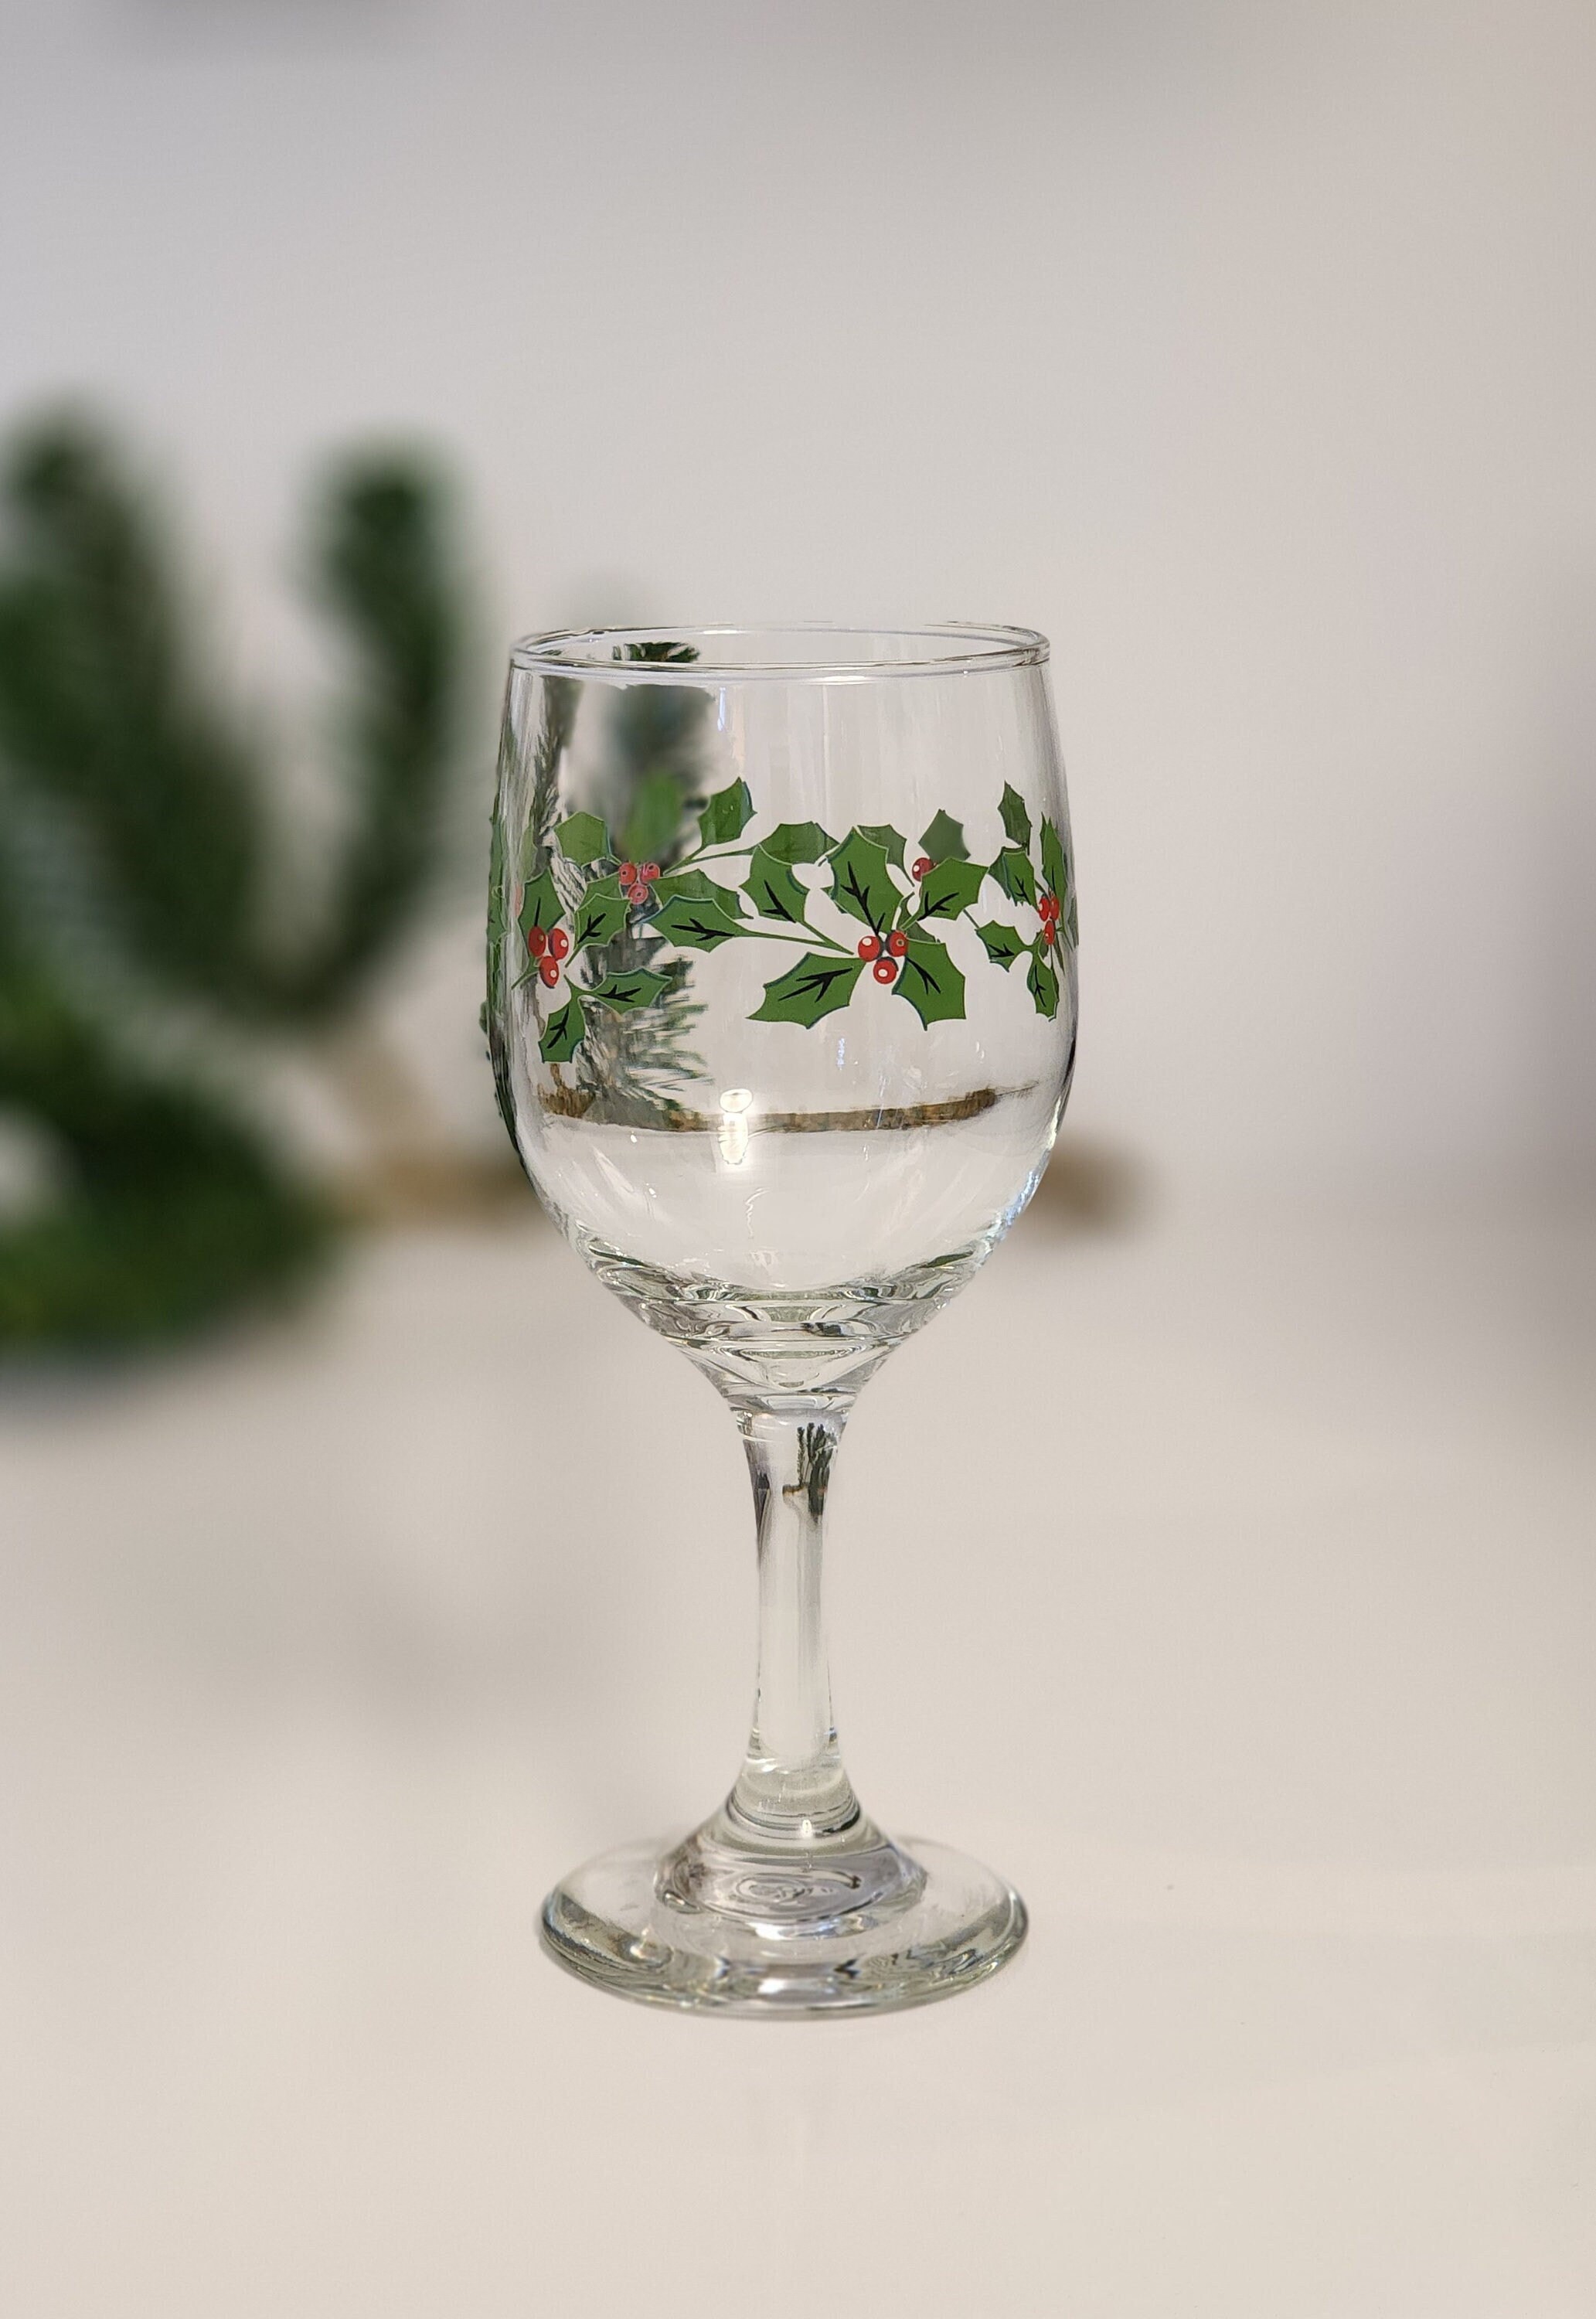 Set of 2 Hand Painted Holly Berry Christmas Wine Glasses Long Stem VGC